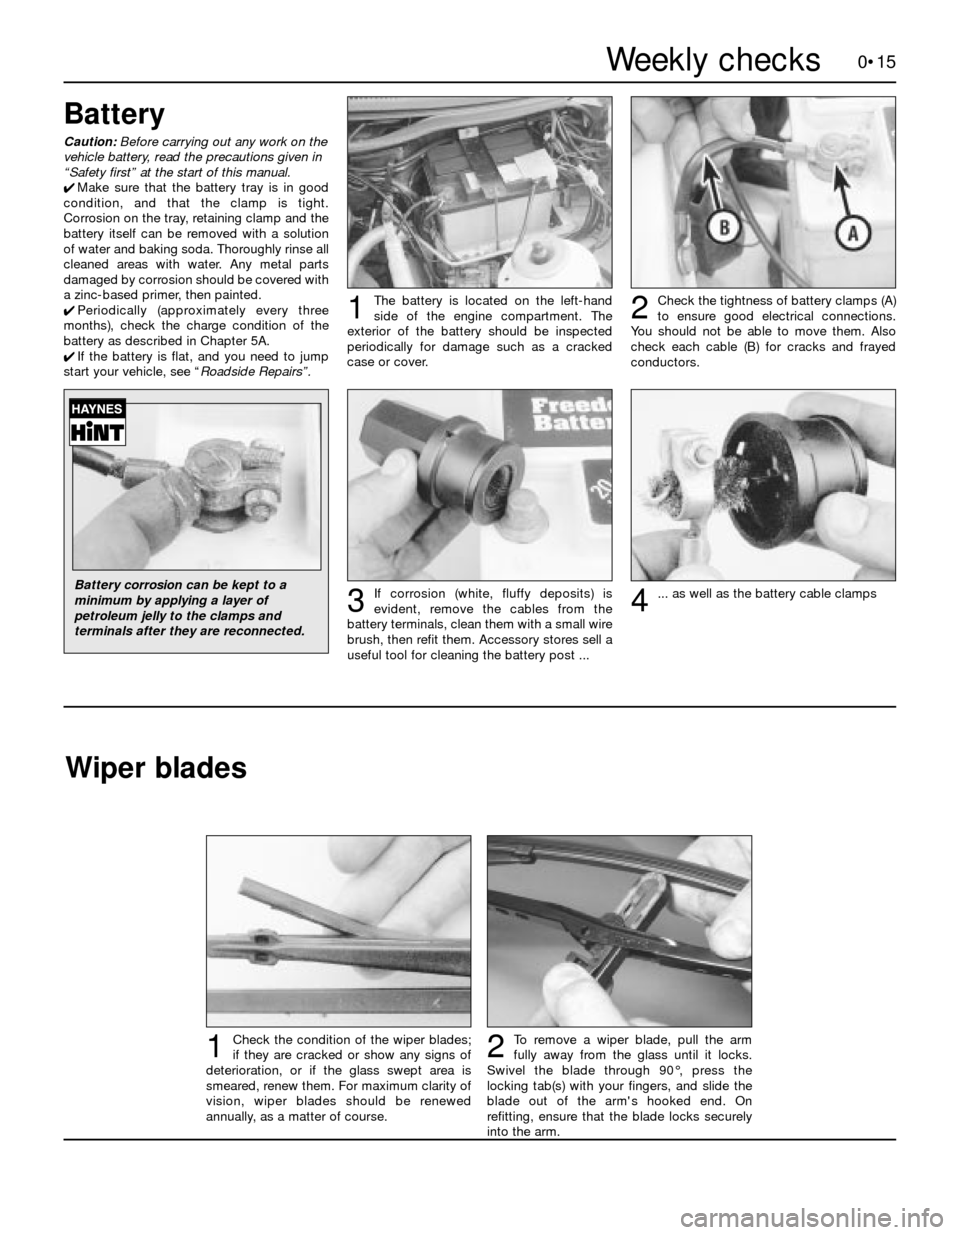 FORD SIERRA 1983 1.G Introduction User Guide 0•15
To remove a wiper blade, pull the arm
fully away from the glass until it locks.
Swivel the blade through 90°, press the
locking tab(s) with your fingers, and slide the
blade out of the arms h